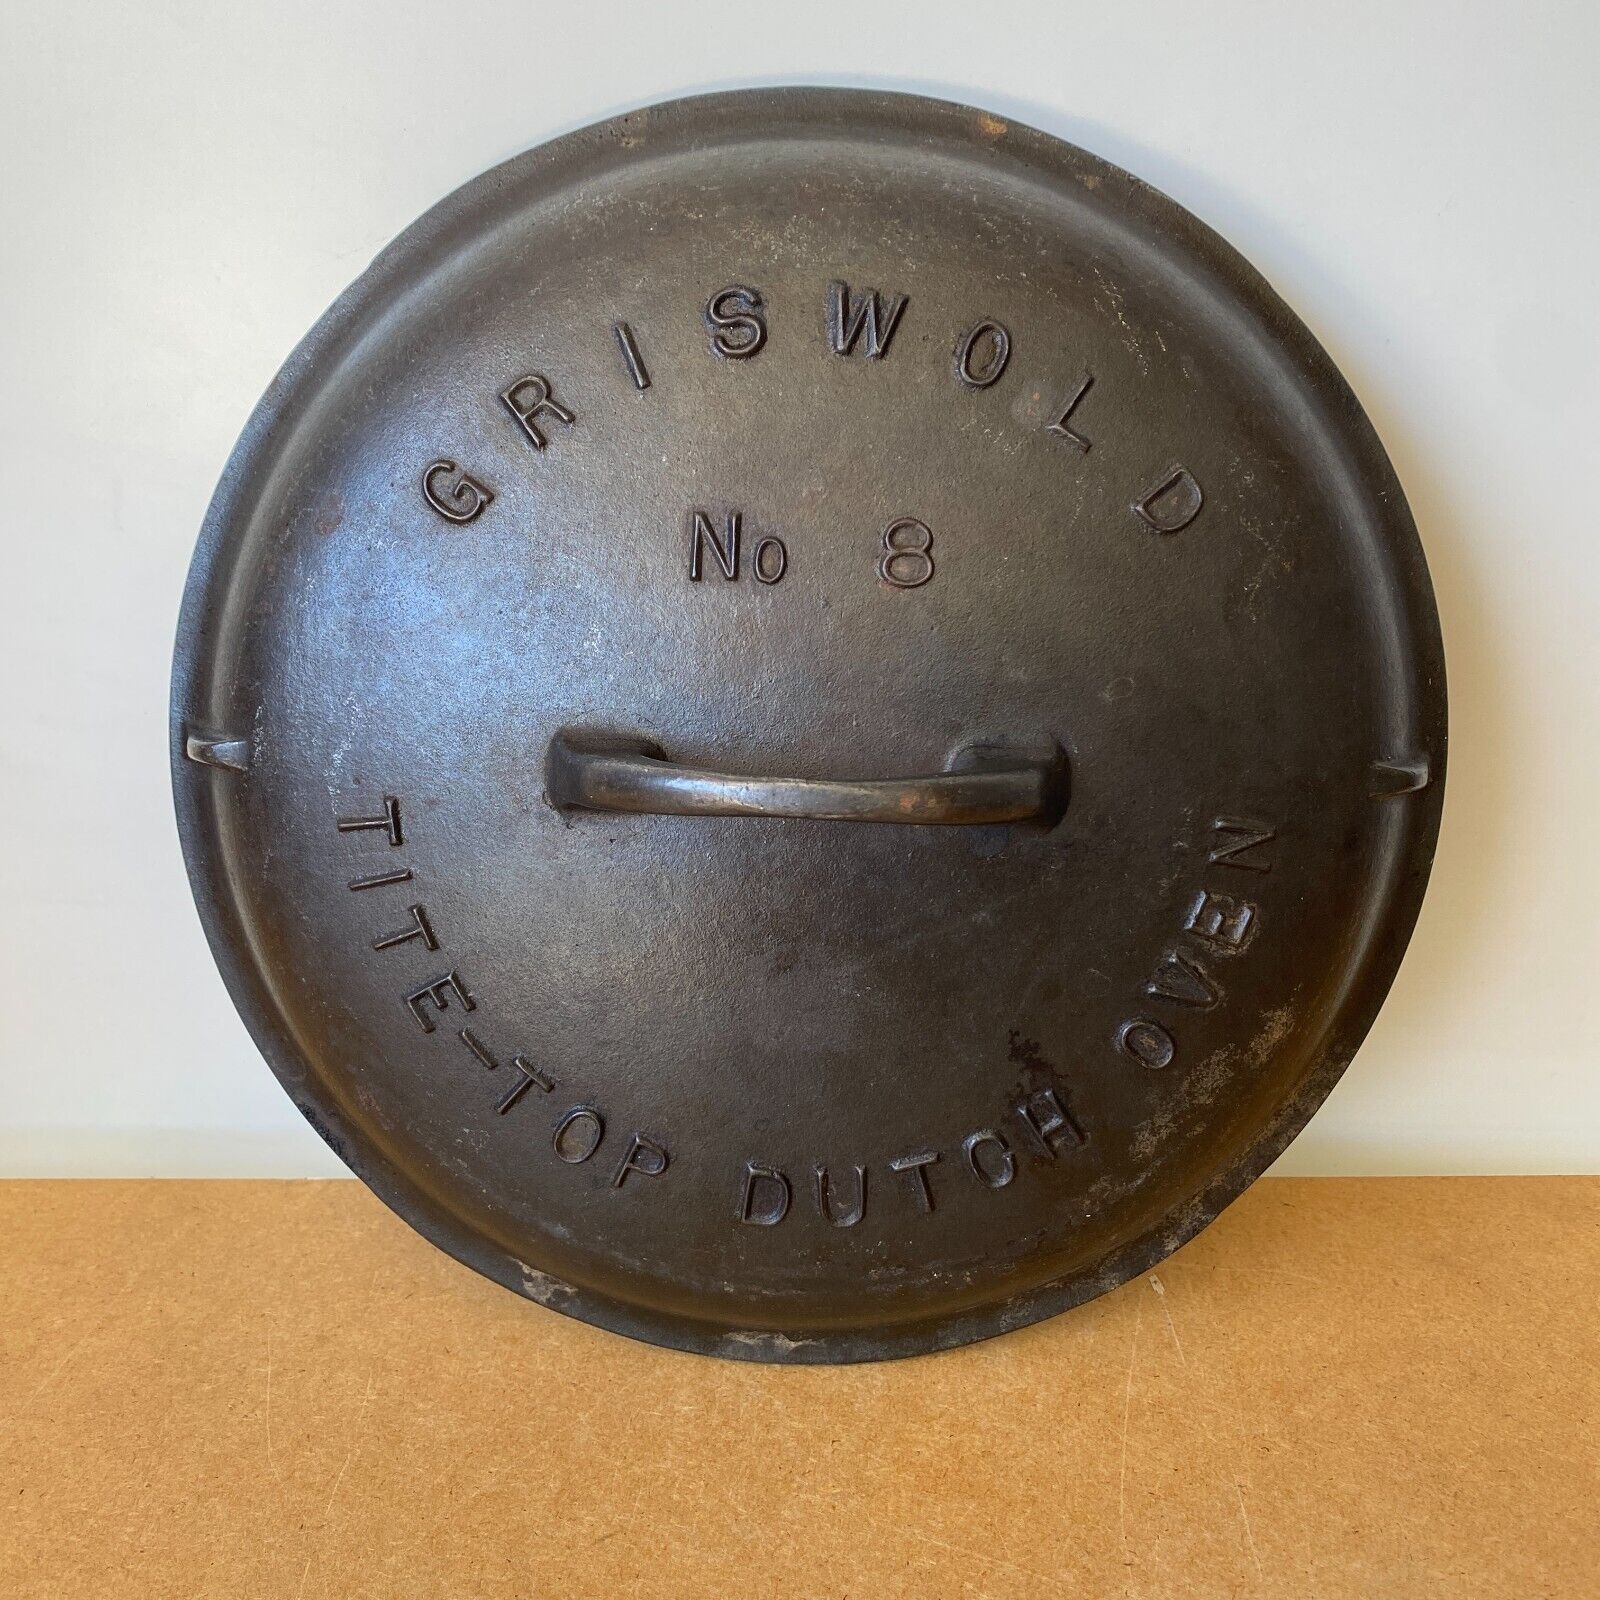 Vintage Griswold No 8 Tite-Top Dutch Oven Cast Iron LID ONLY 2551A USA